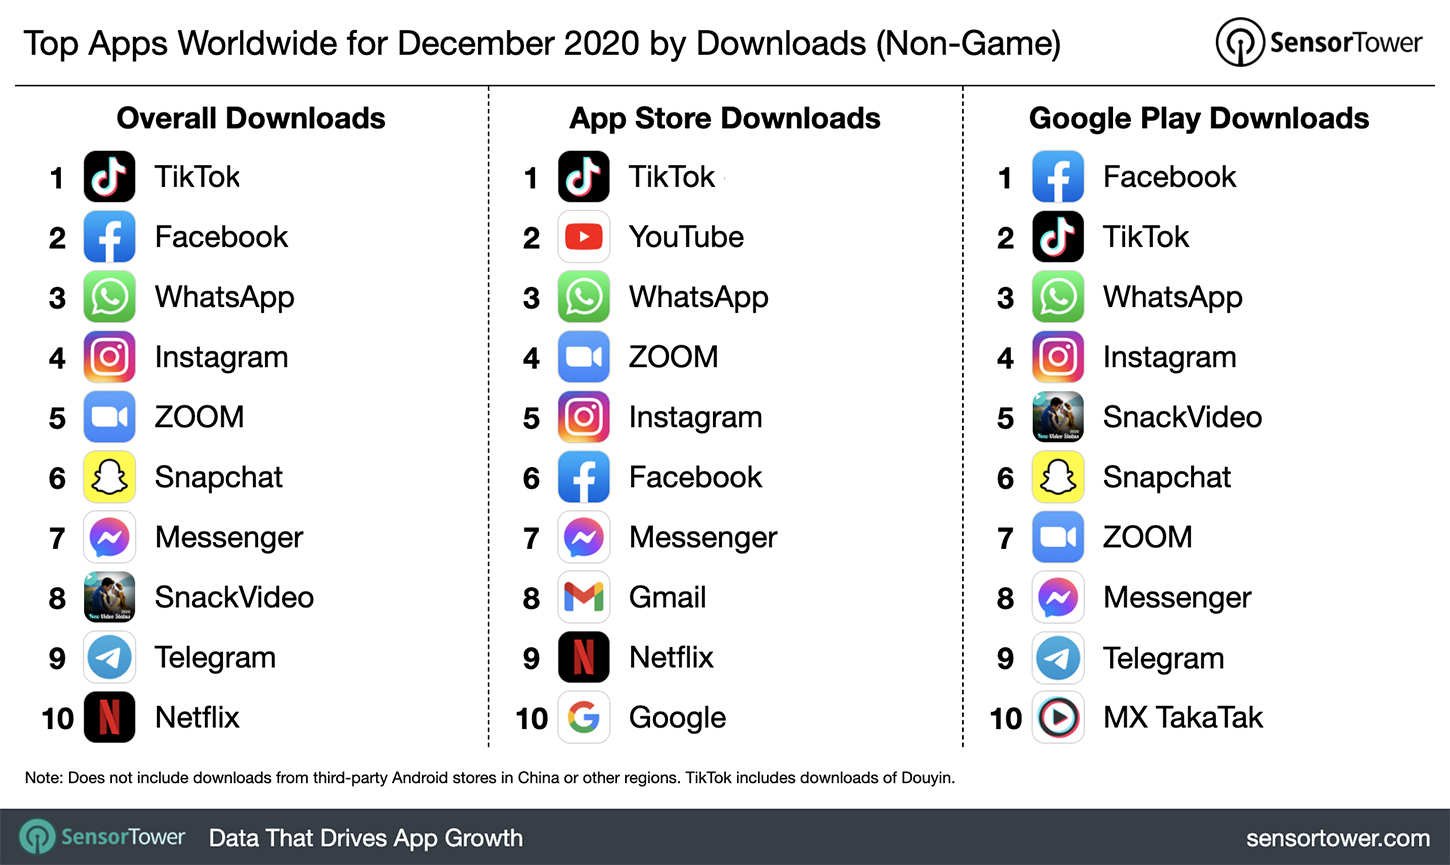 Top Apps Worldwide for December 2020 by Downloads